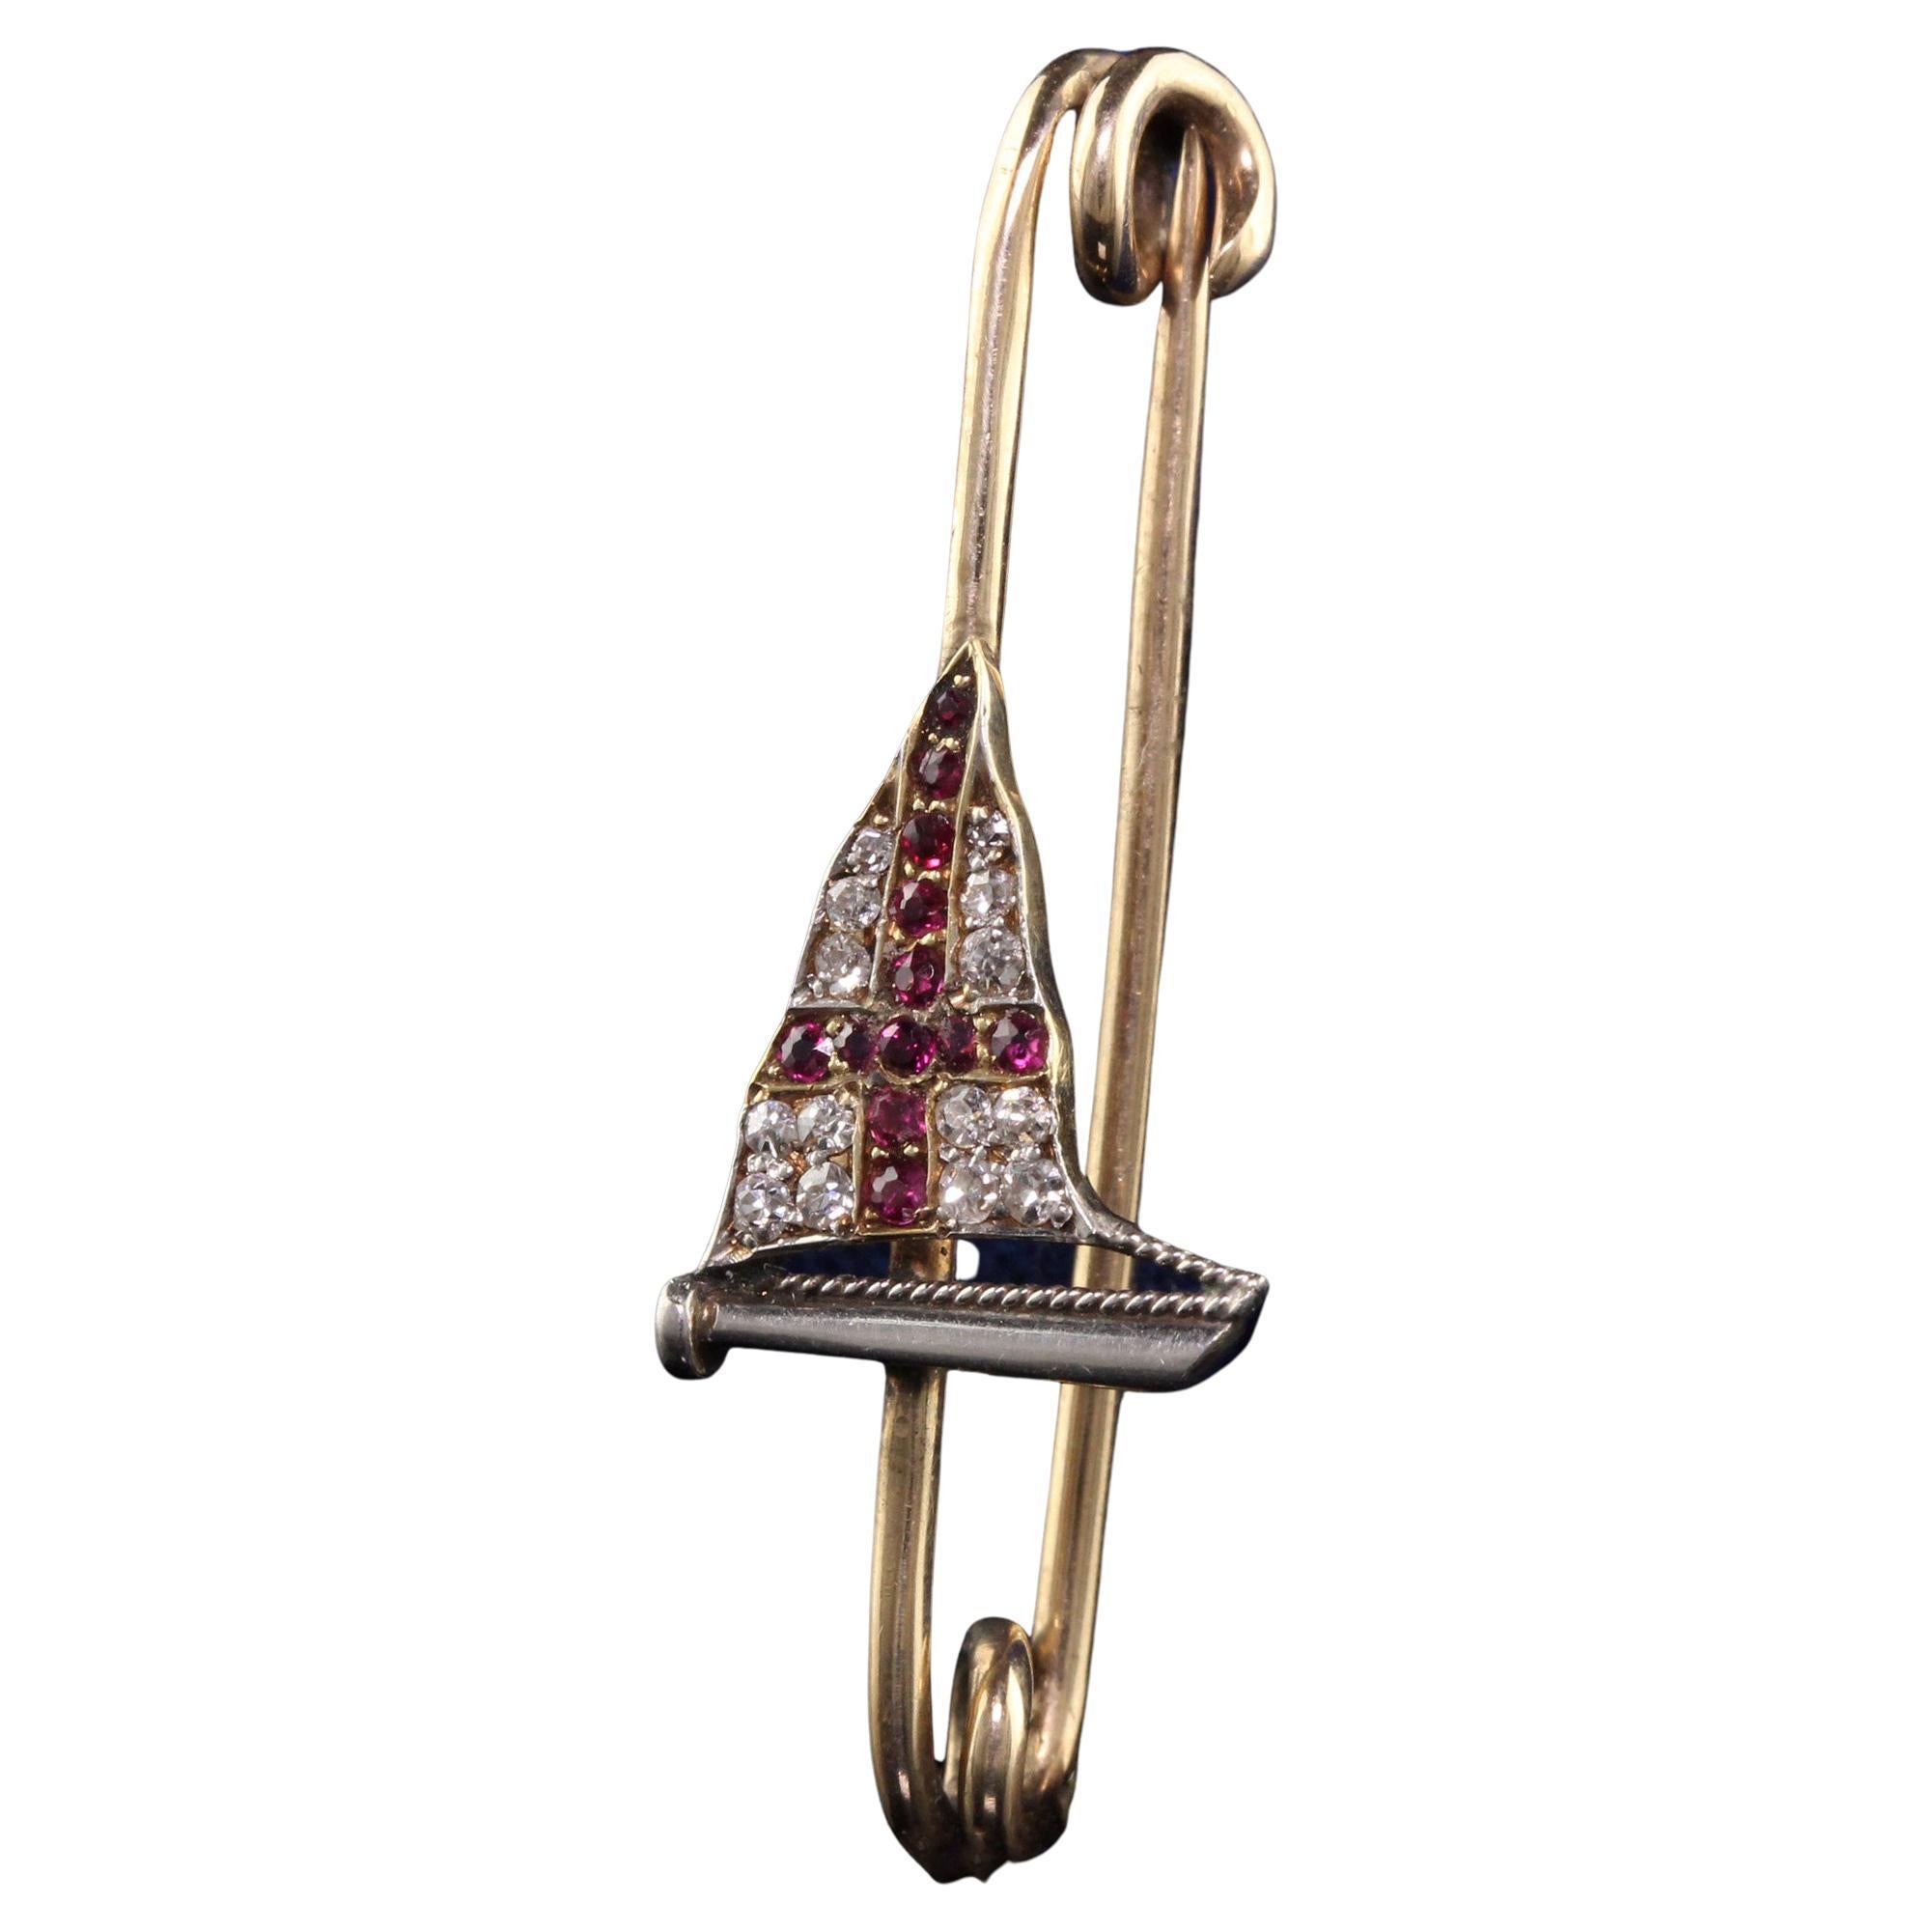 Antique Art Deco 14K Yellow Gold Diamond and Ruby Sailboat/Flag Pin